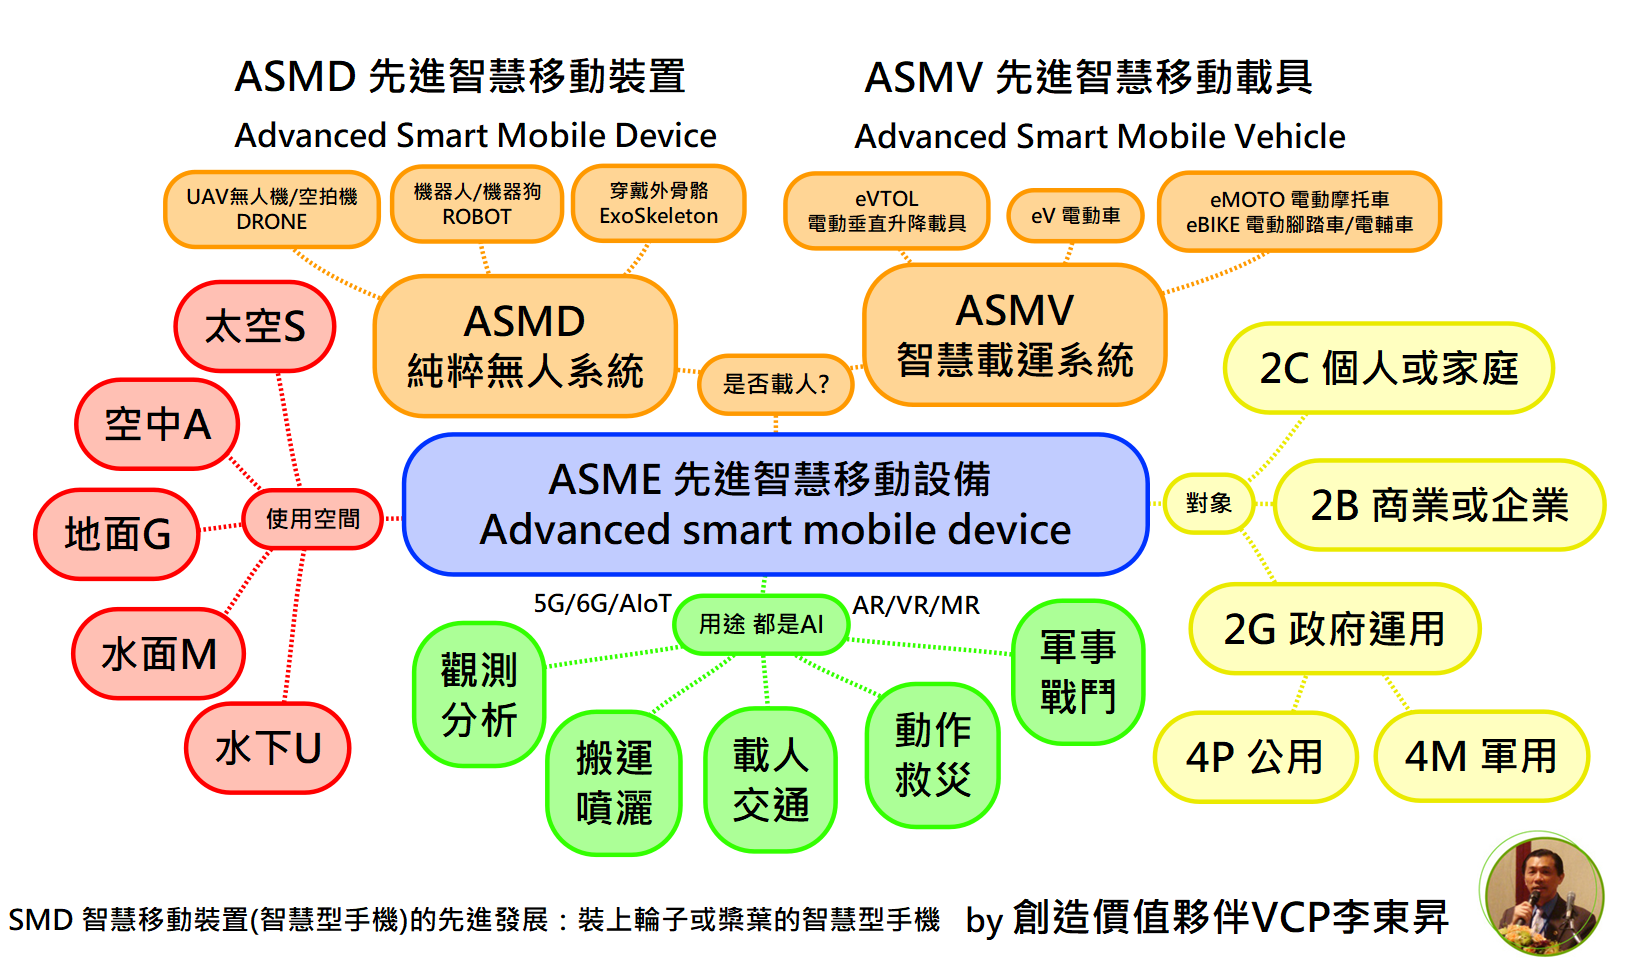 Read more about the article ASME 先進智慧移動設備 Advanced Smart Mobile Equipment 包含兩大類 ASMV 先進智慧移動載具 Advanced Smart Mobile Vehicle 及 ASMD 先進智慧移動裝置 Advanced Smart Mobile Device